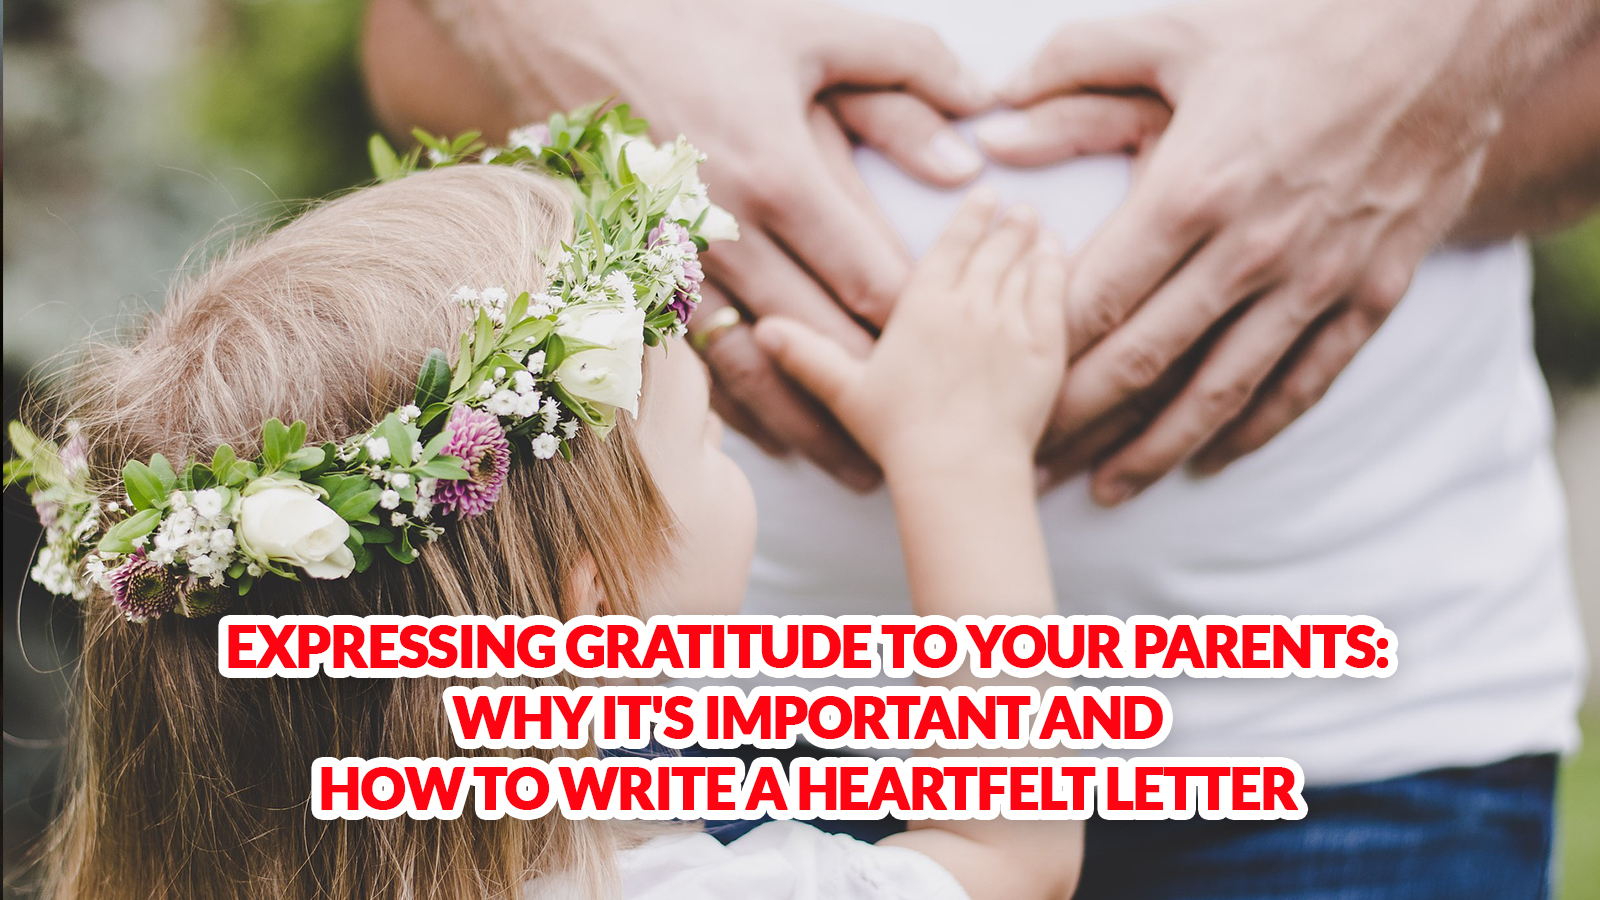 Expressing Gratitude to Your Parents: Why It’s Important and How to Write a Heartfelt Letter